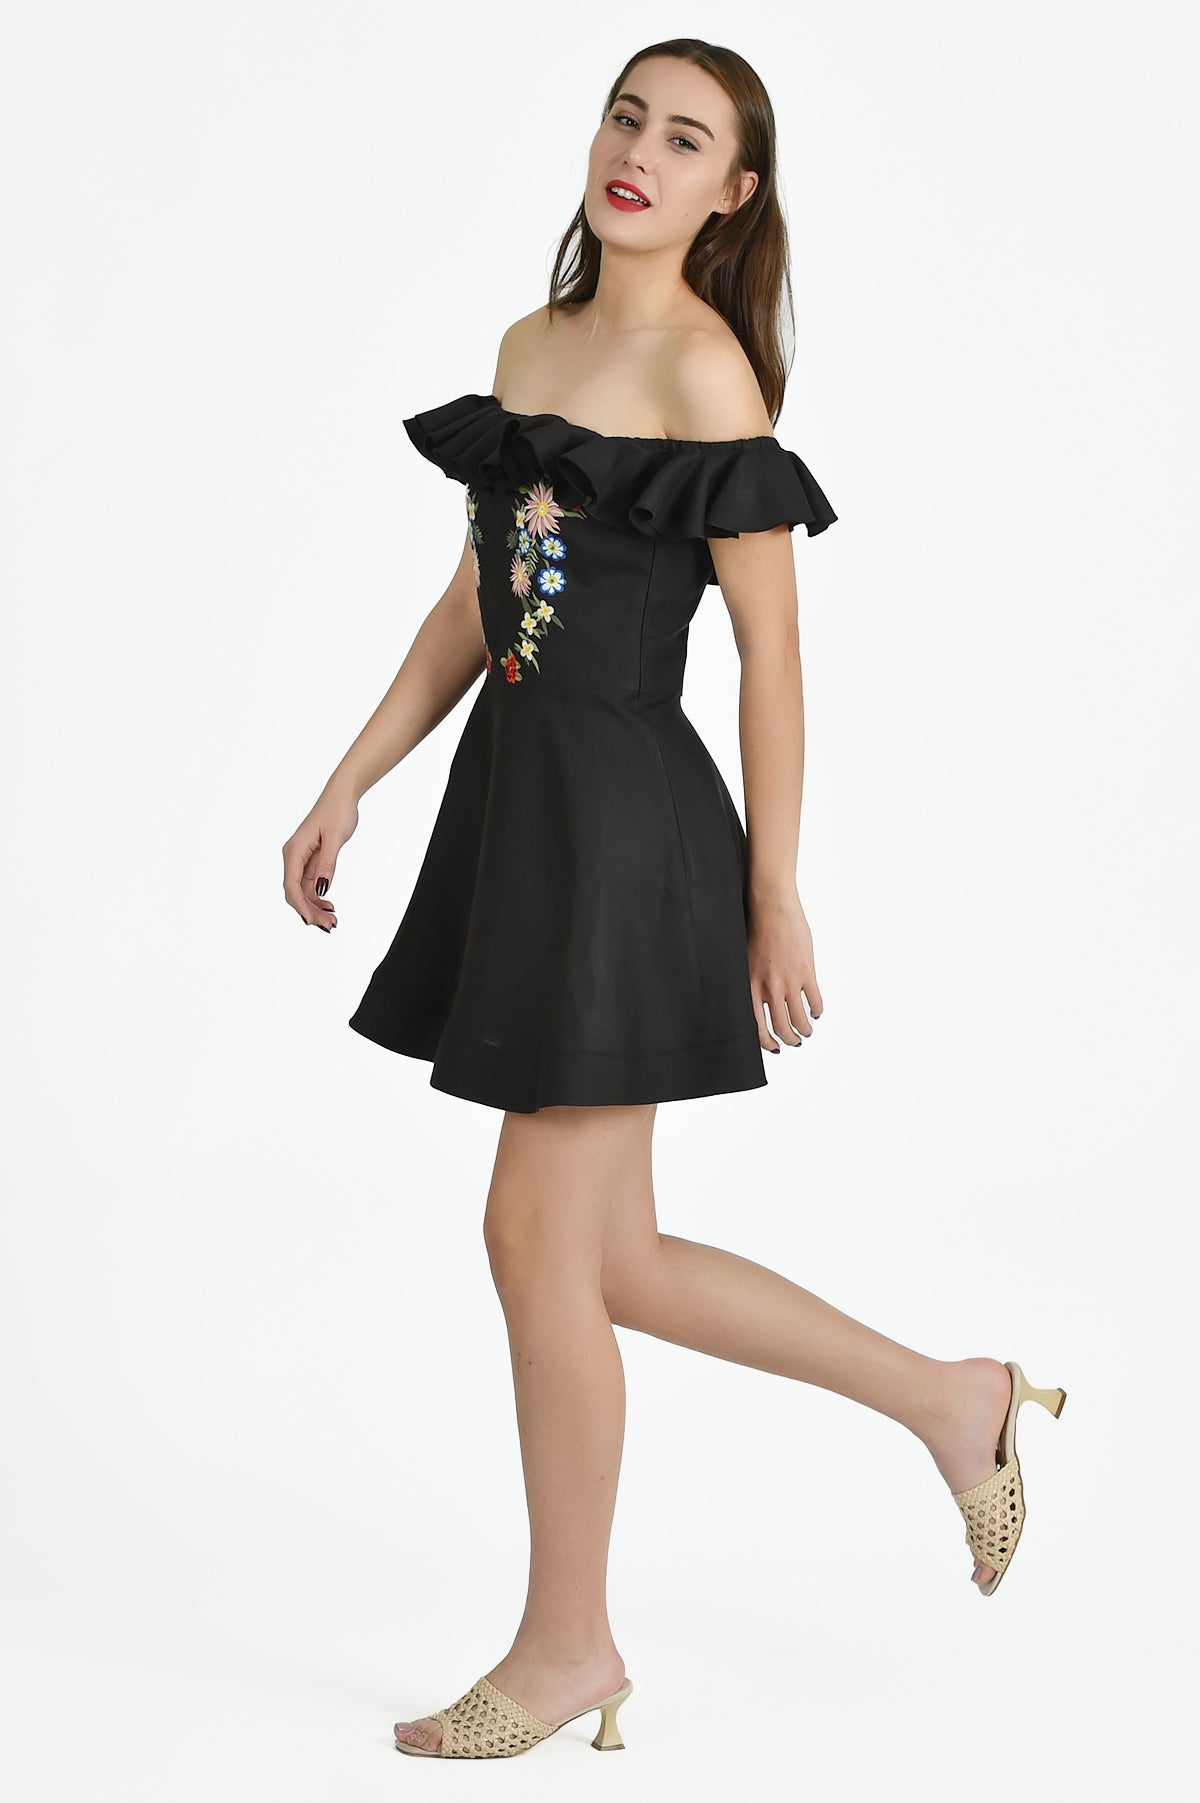 Off the Shoulder View of the Irene Dress in Black